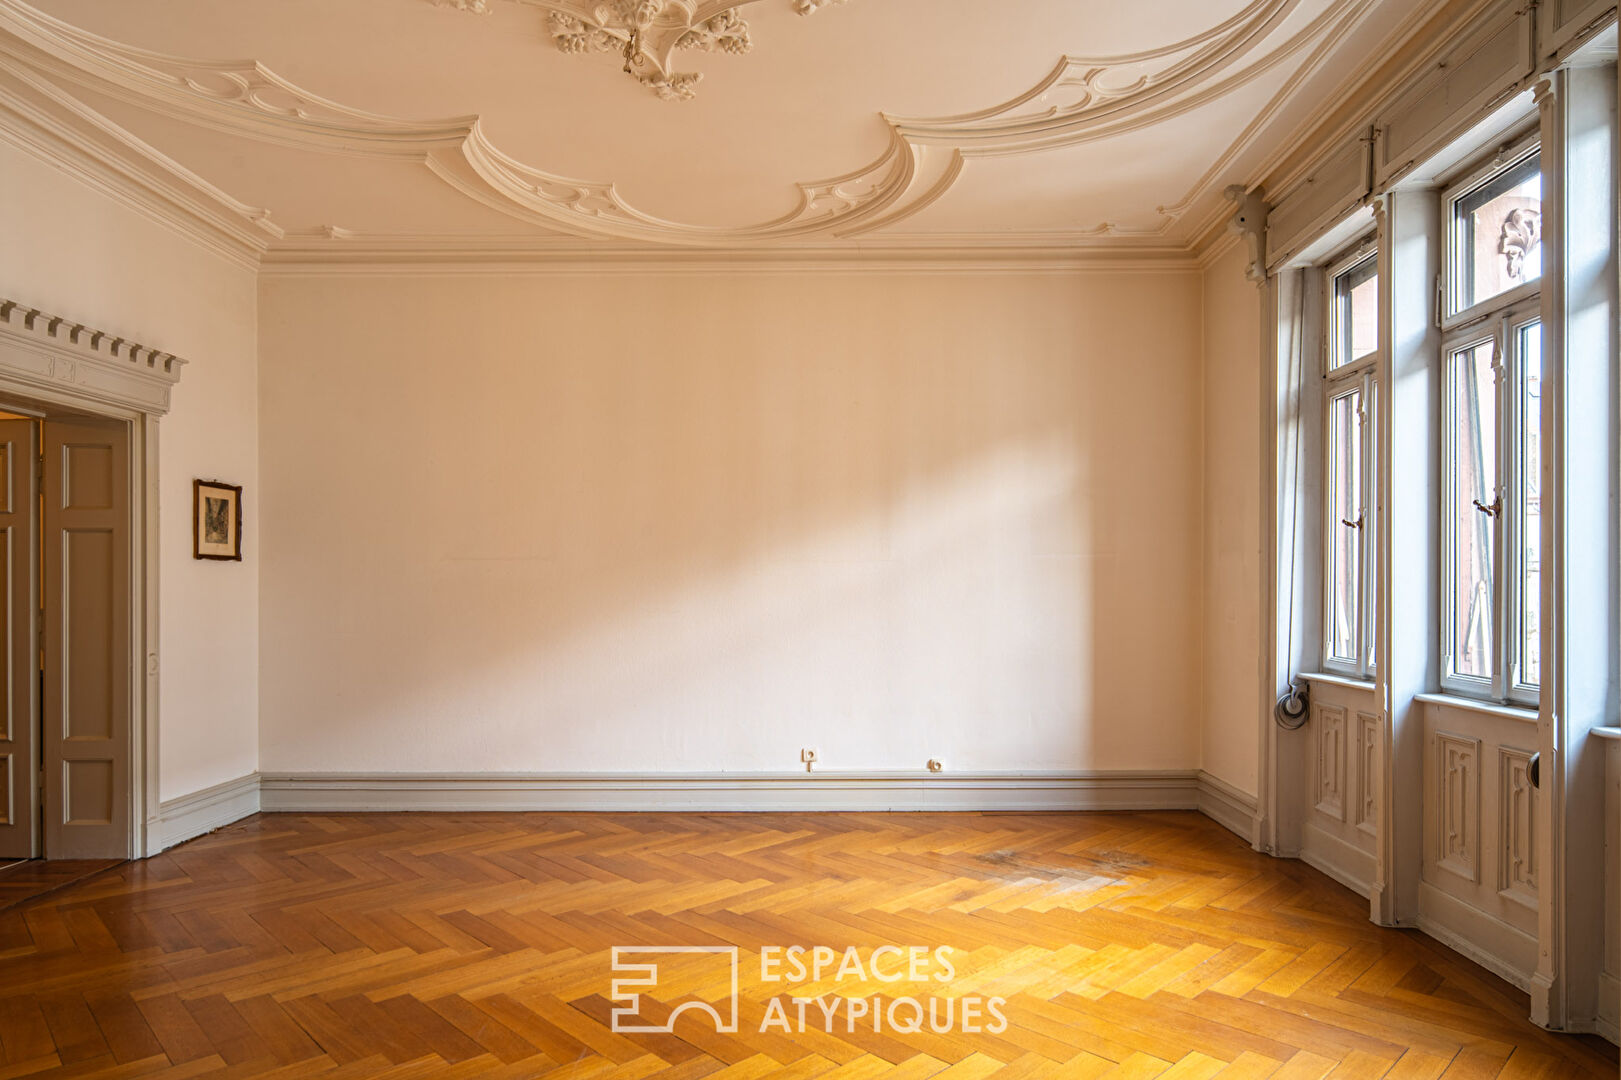 Character flat in the heart of the Neustadt